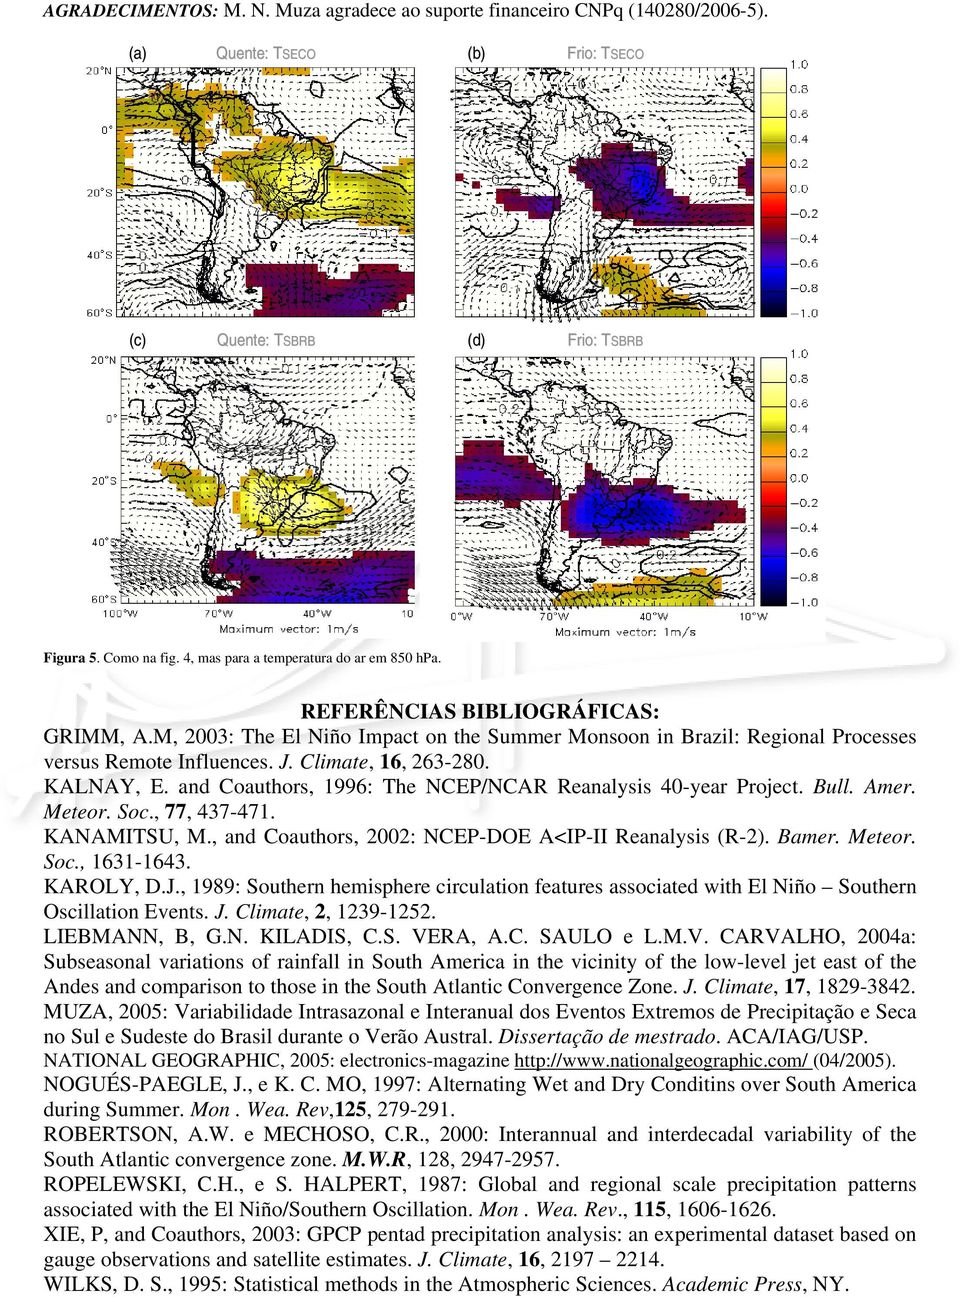 Climate, 16, 263-280. KALNAY, E. and Coauthors, 1996: The NCEP/NCAR Reanalysis 40-year Project. Bull. Amer. Meteor. Soc., 77, 437-471. KANAMITSU, M.